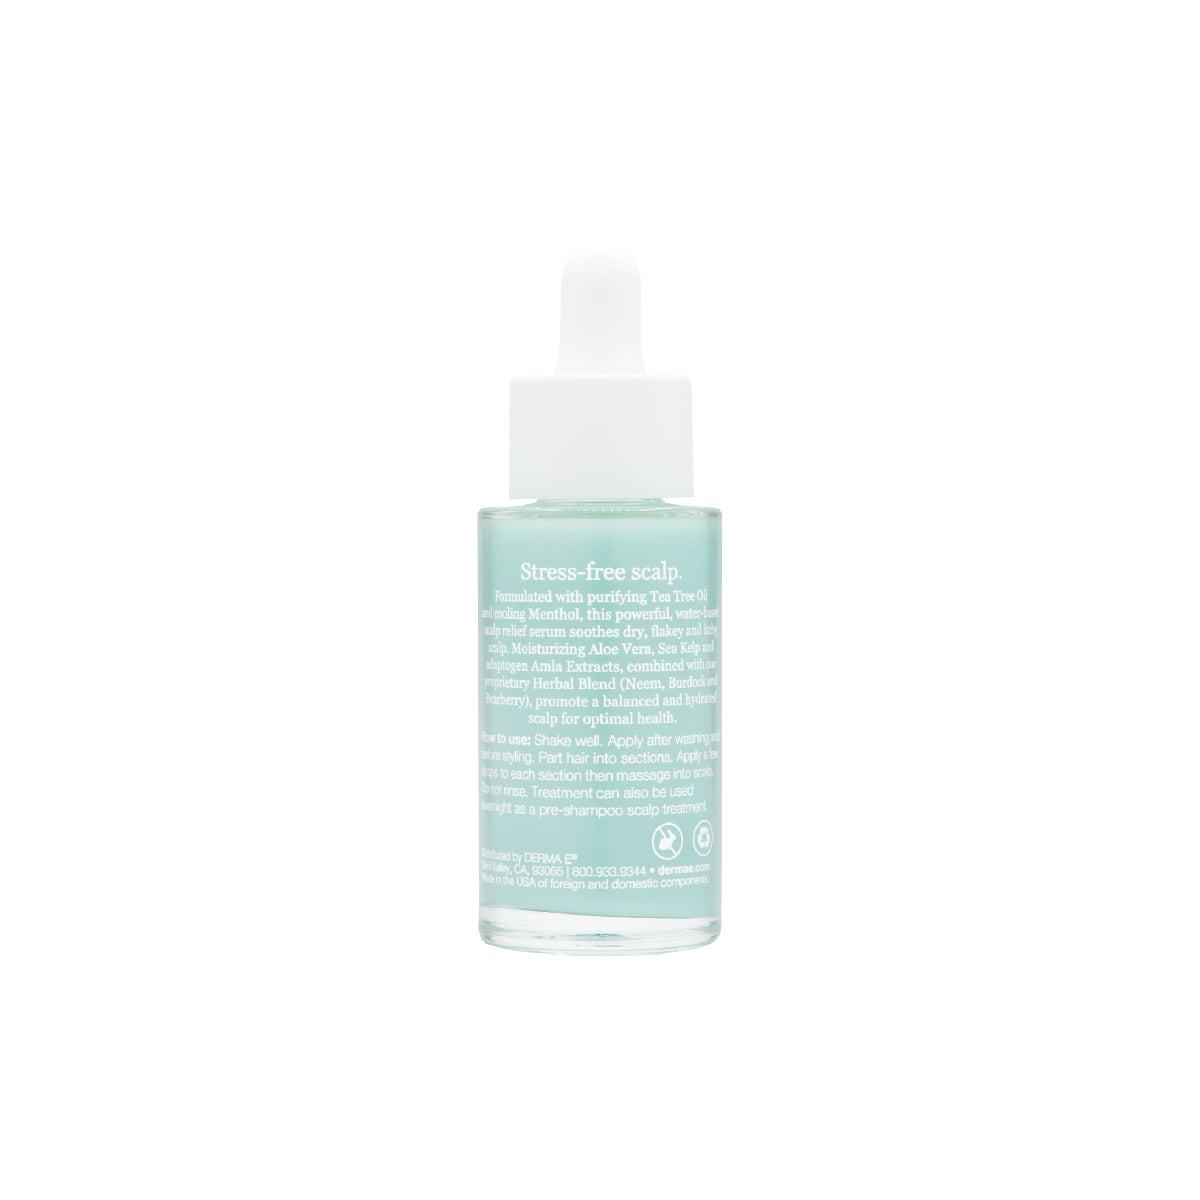 &quot;Close-up of a translucent bottle with a white dropper cap, labeled &#39;Stress-free scalp&#39;. The product mentions ingredients like Tea Tree Oil and Menthol, with detailed usage instructions, set against a white background.&quot;